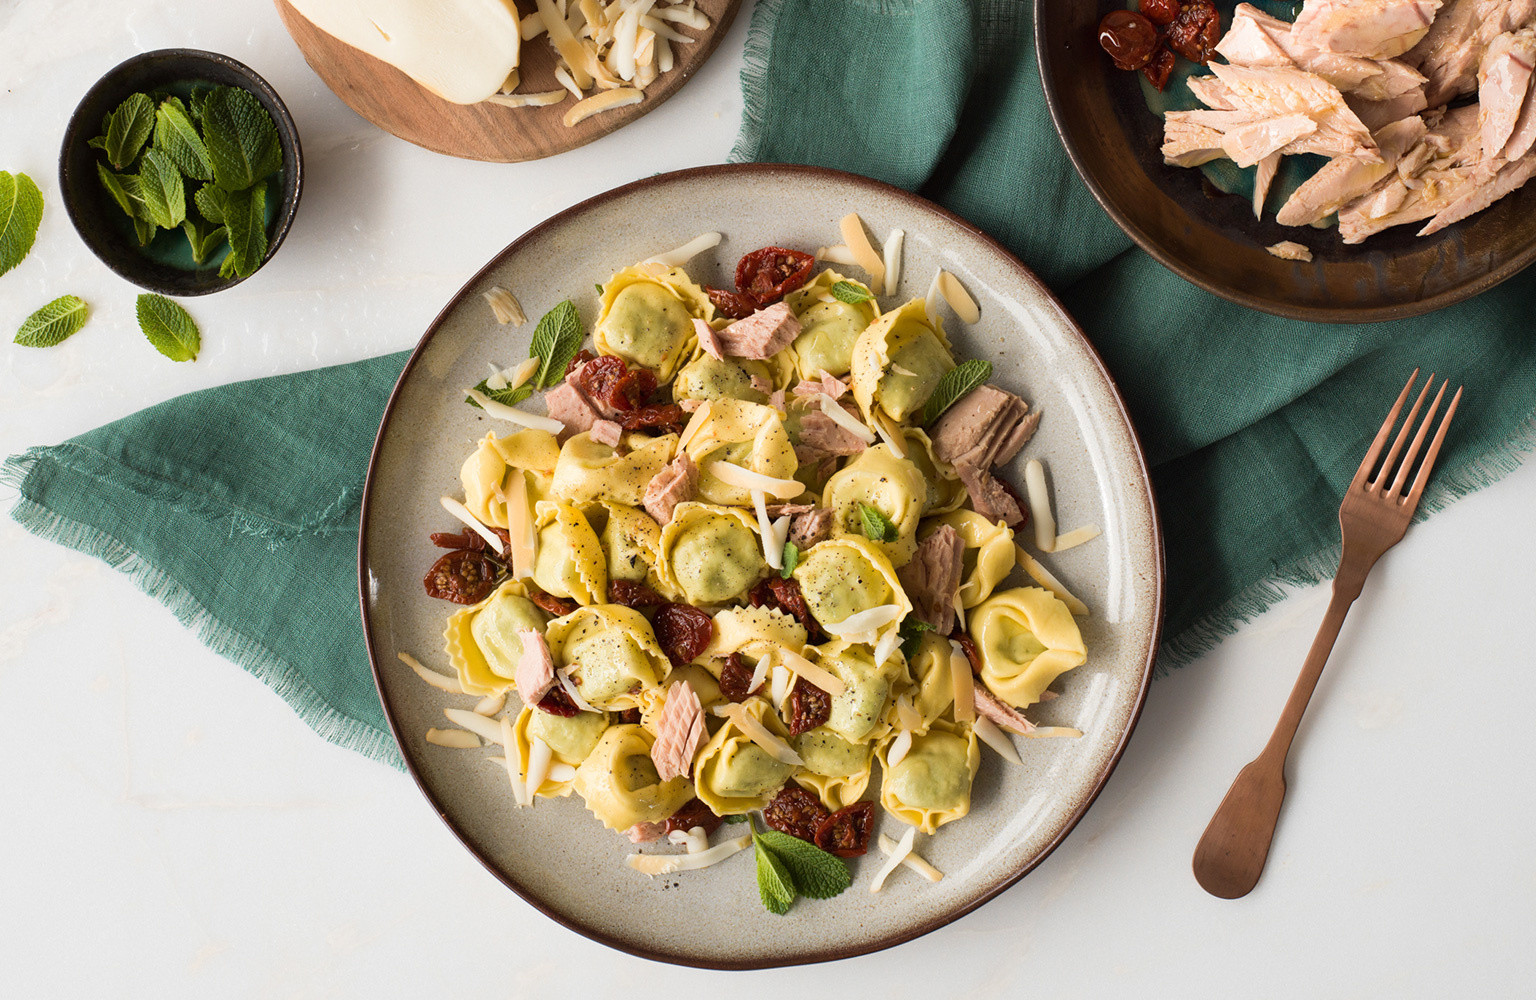 RICOTTA & SPINACH TORTELLINI WITH TUNA, DRIED TOMATOES, PROVOLONE